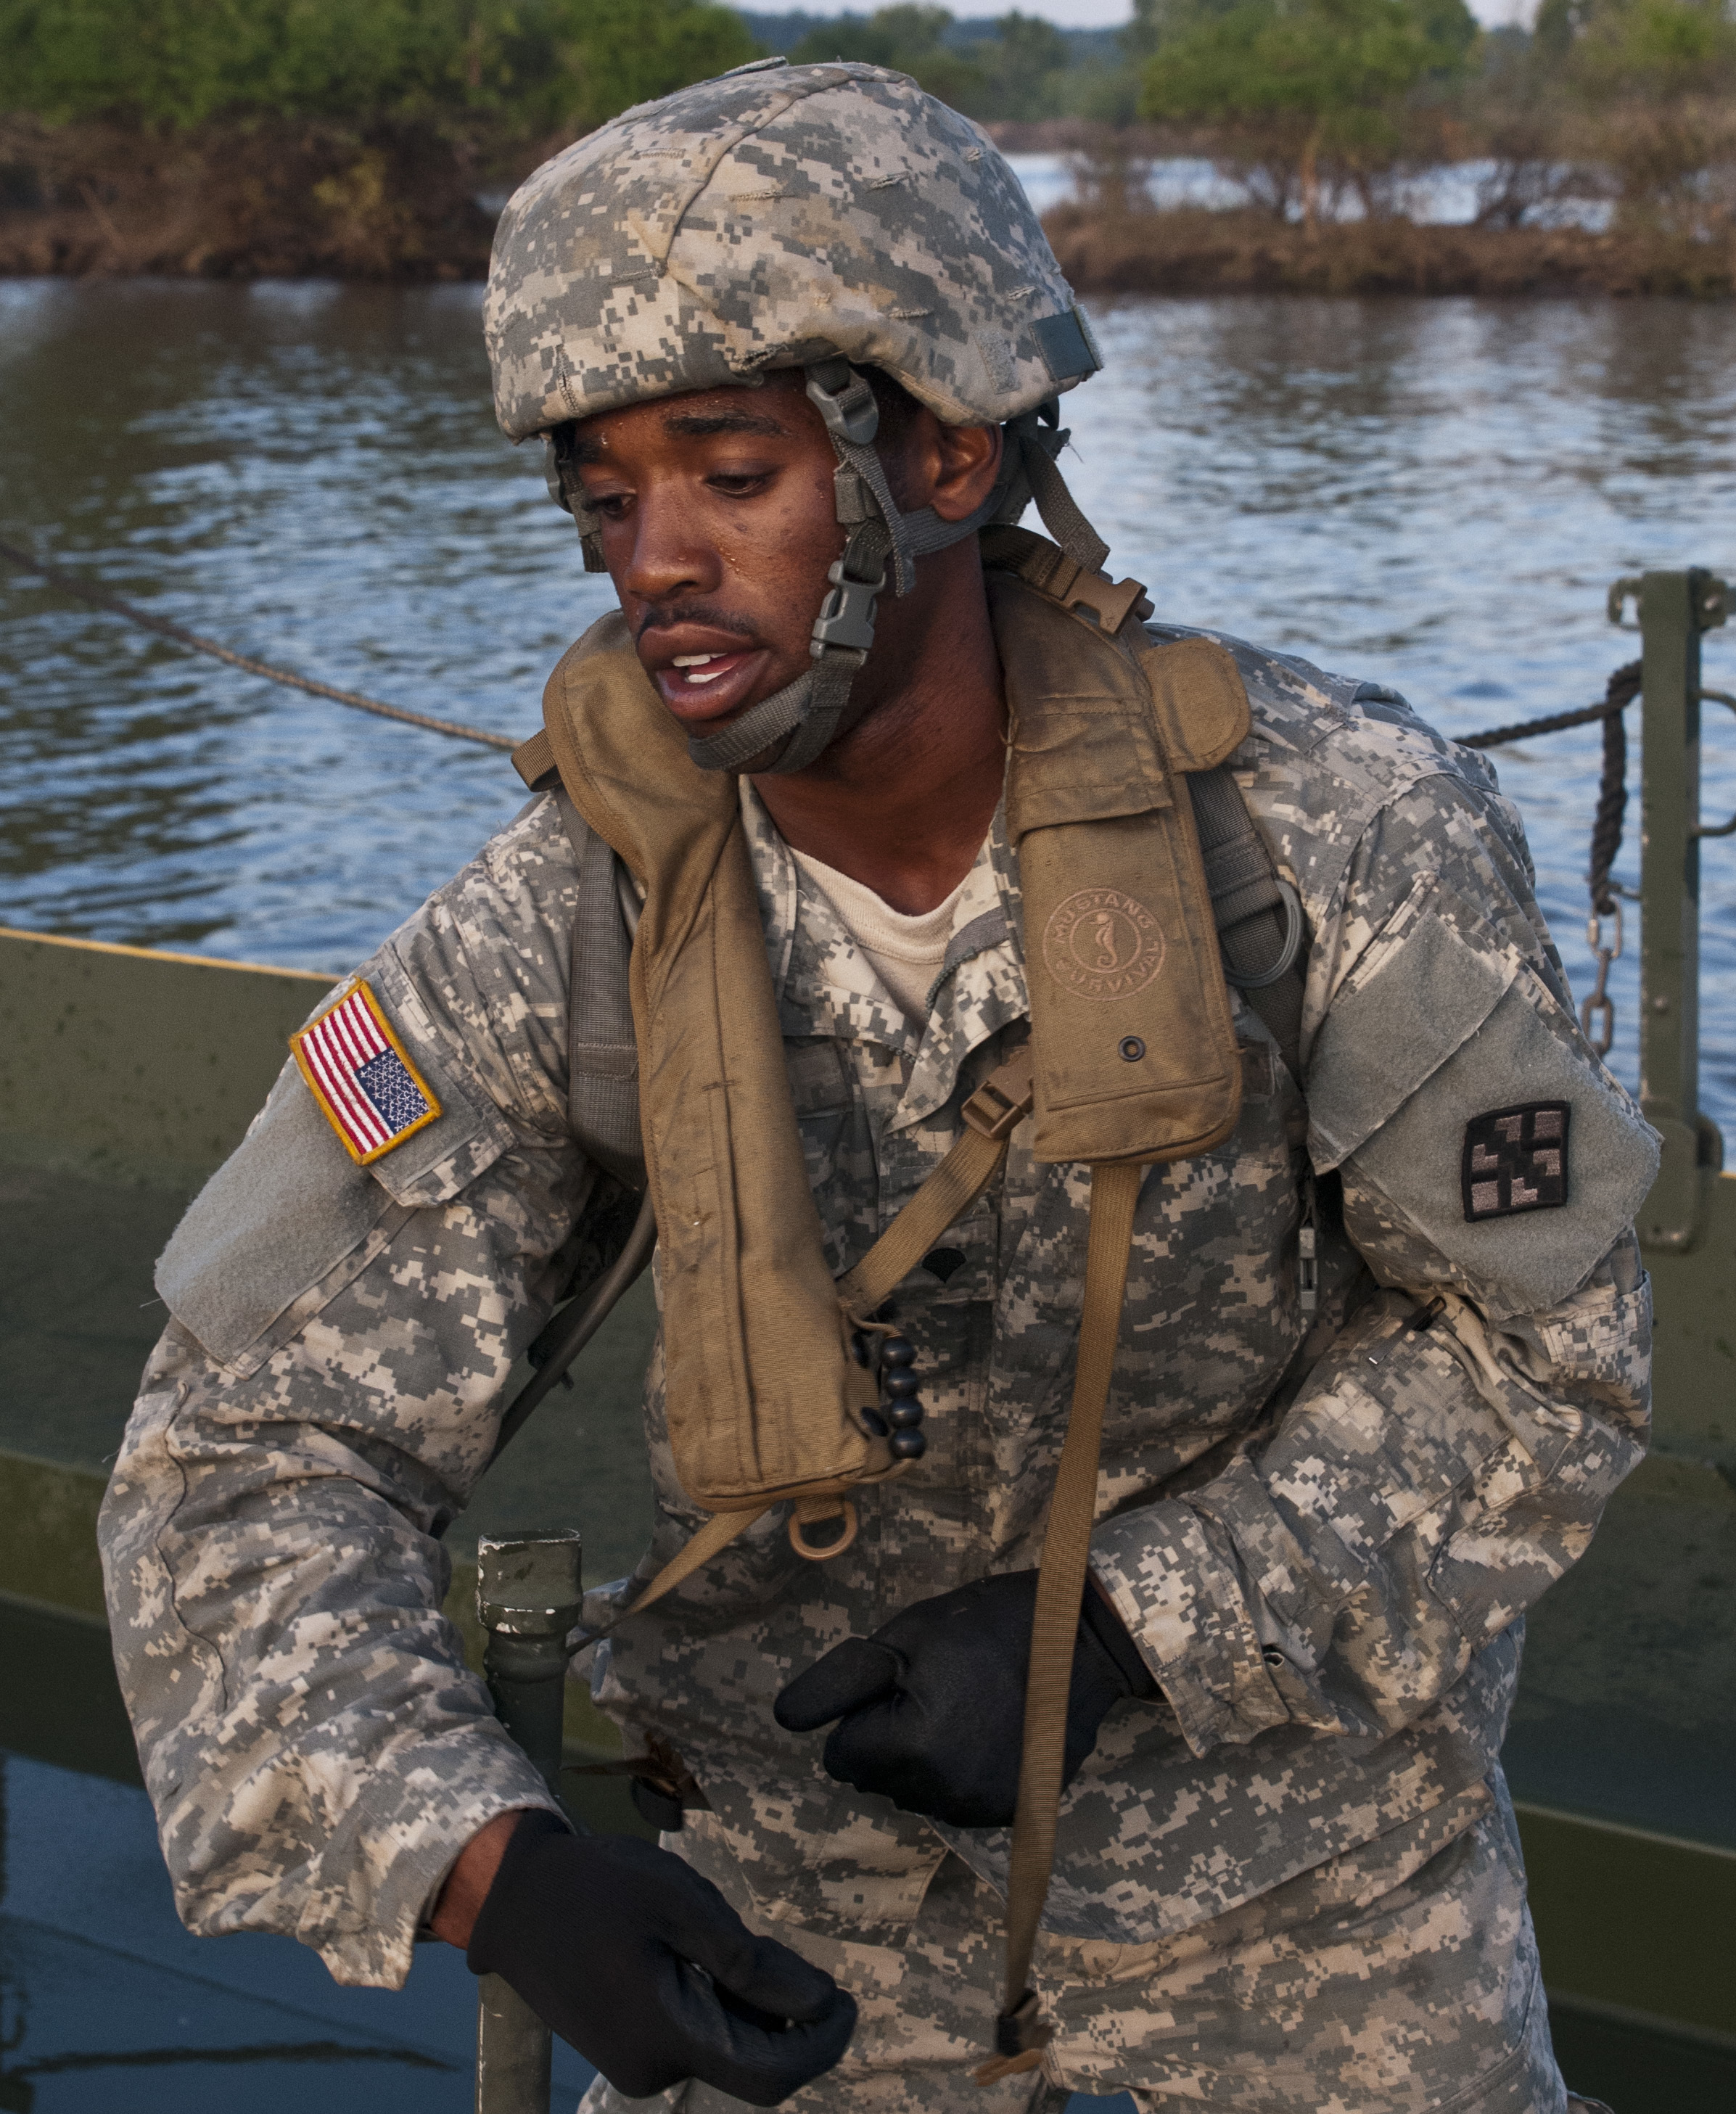 U.S. Army Spc. Jarvis Bigger secures two floats during the River